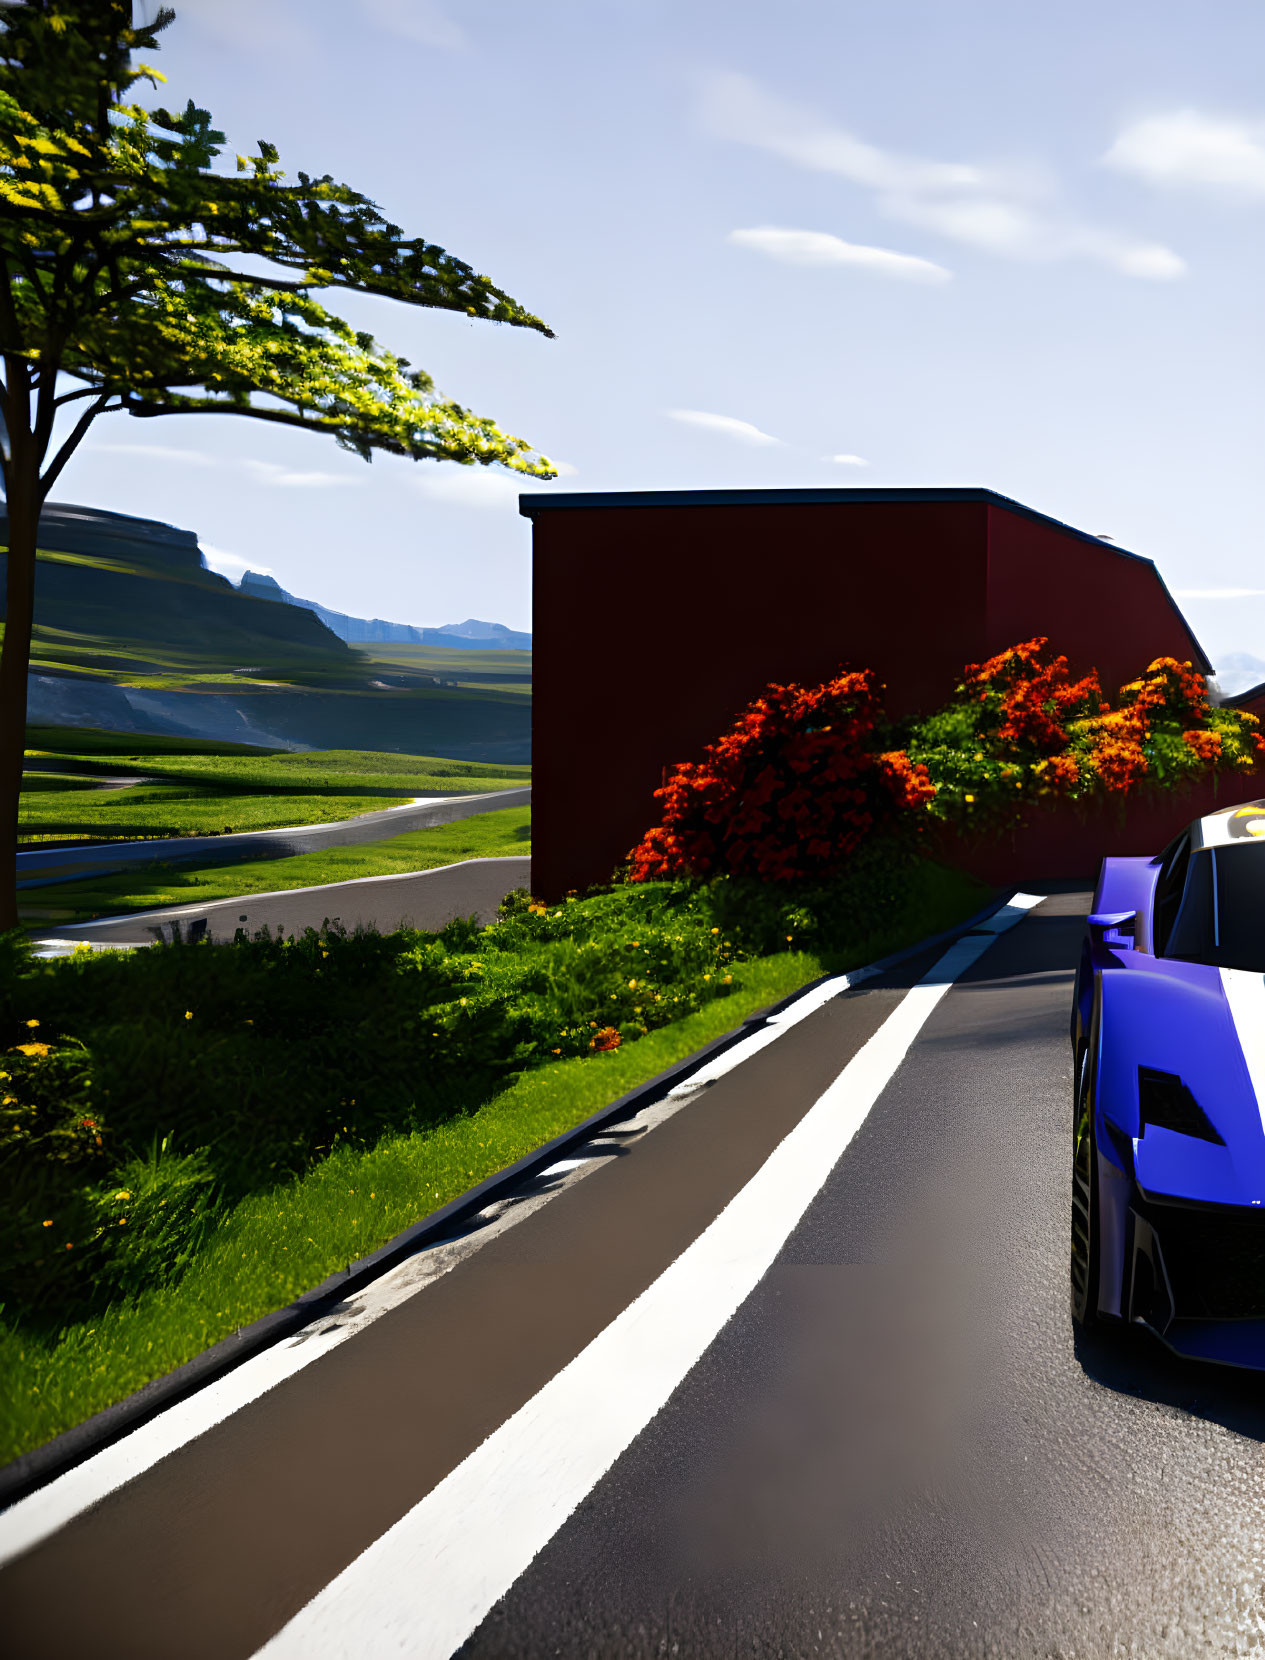 Blue Sports Car Parked Near Red Building and Flowering Bushes on Road with Green Hills and Clear